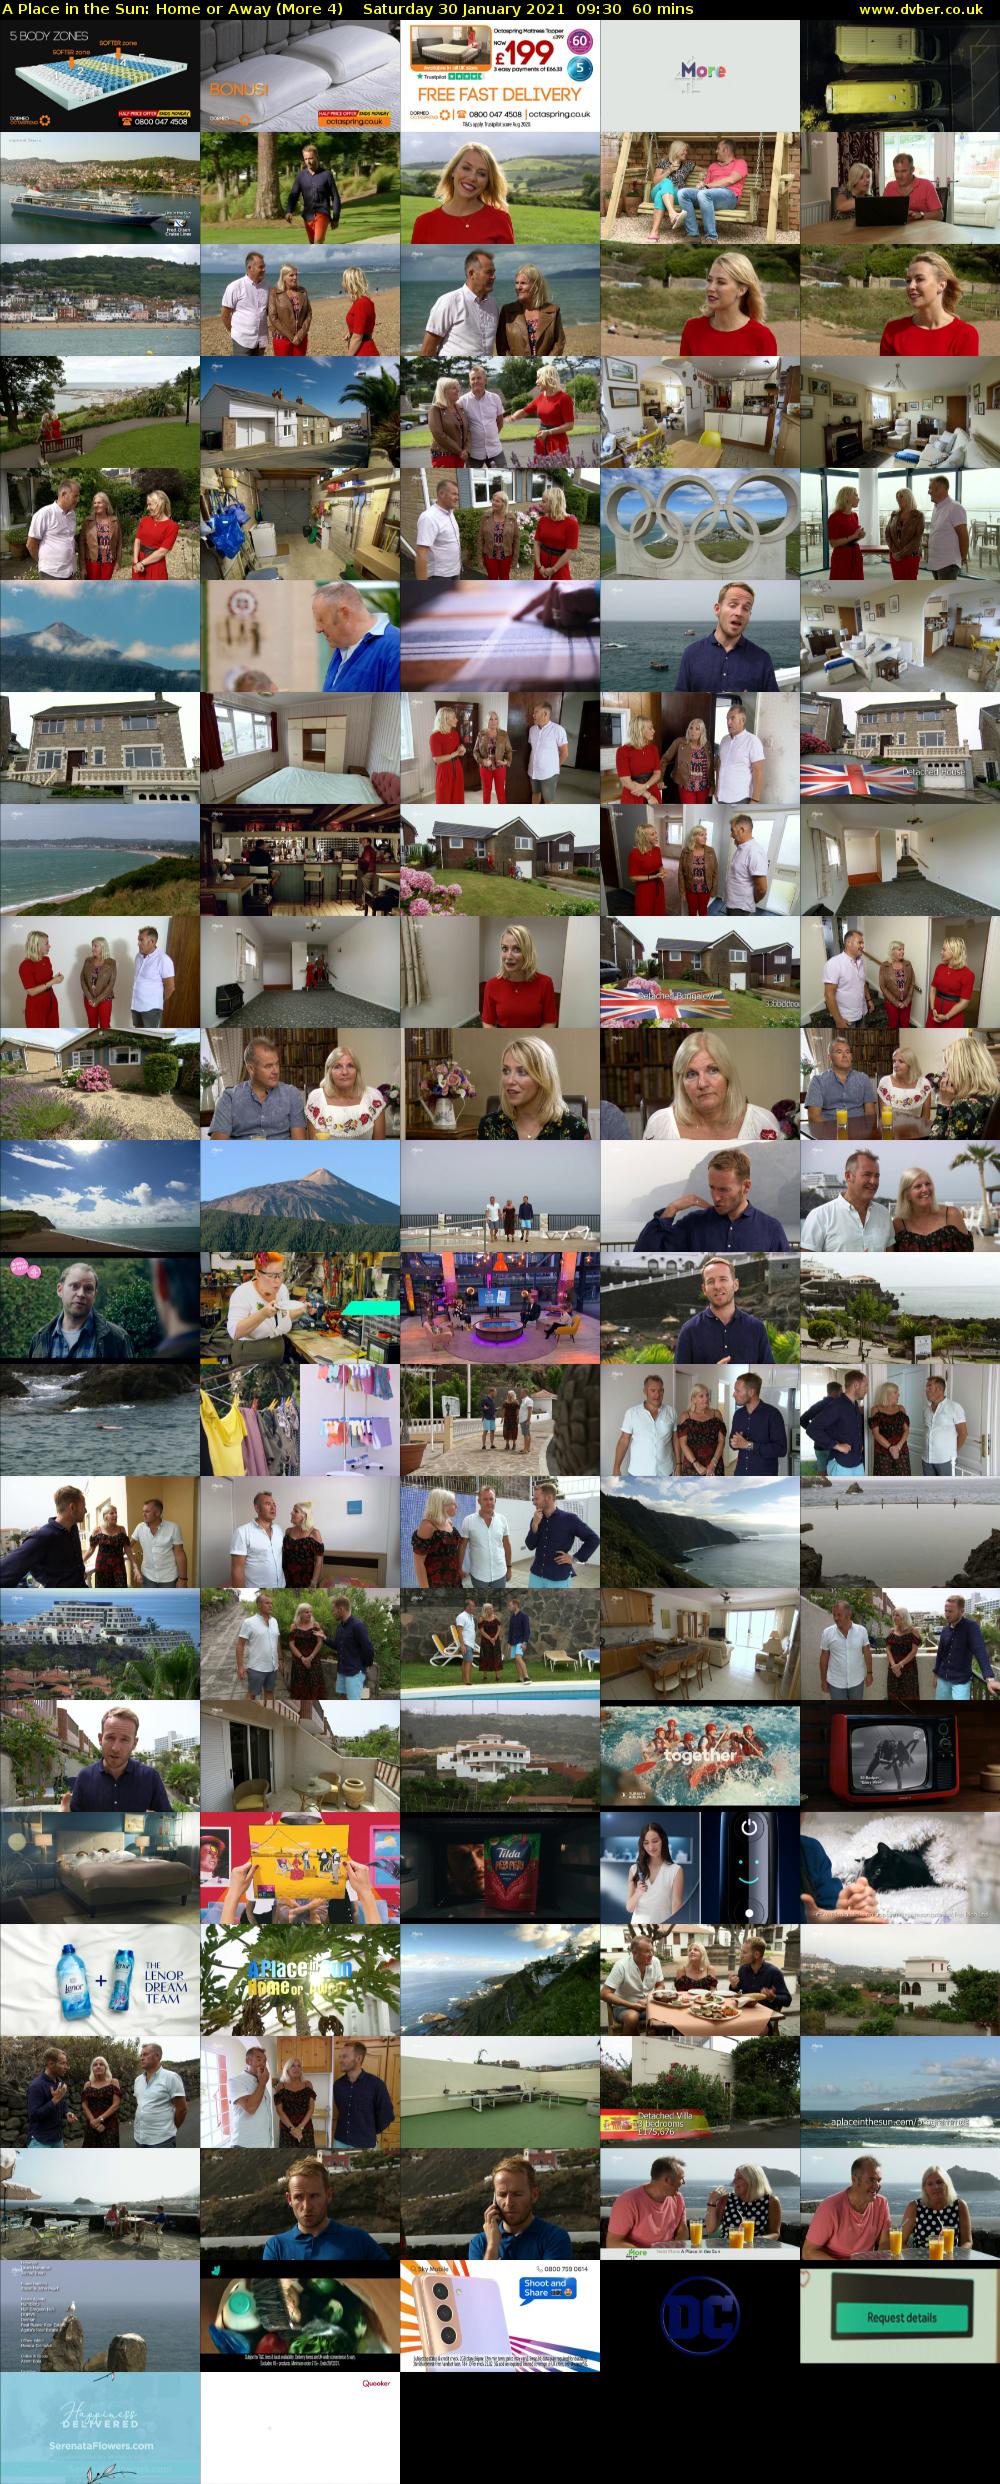 A Place in the Sun: Home or Away (More 4) Saturday 30 January 2021 09:30 - 10:30